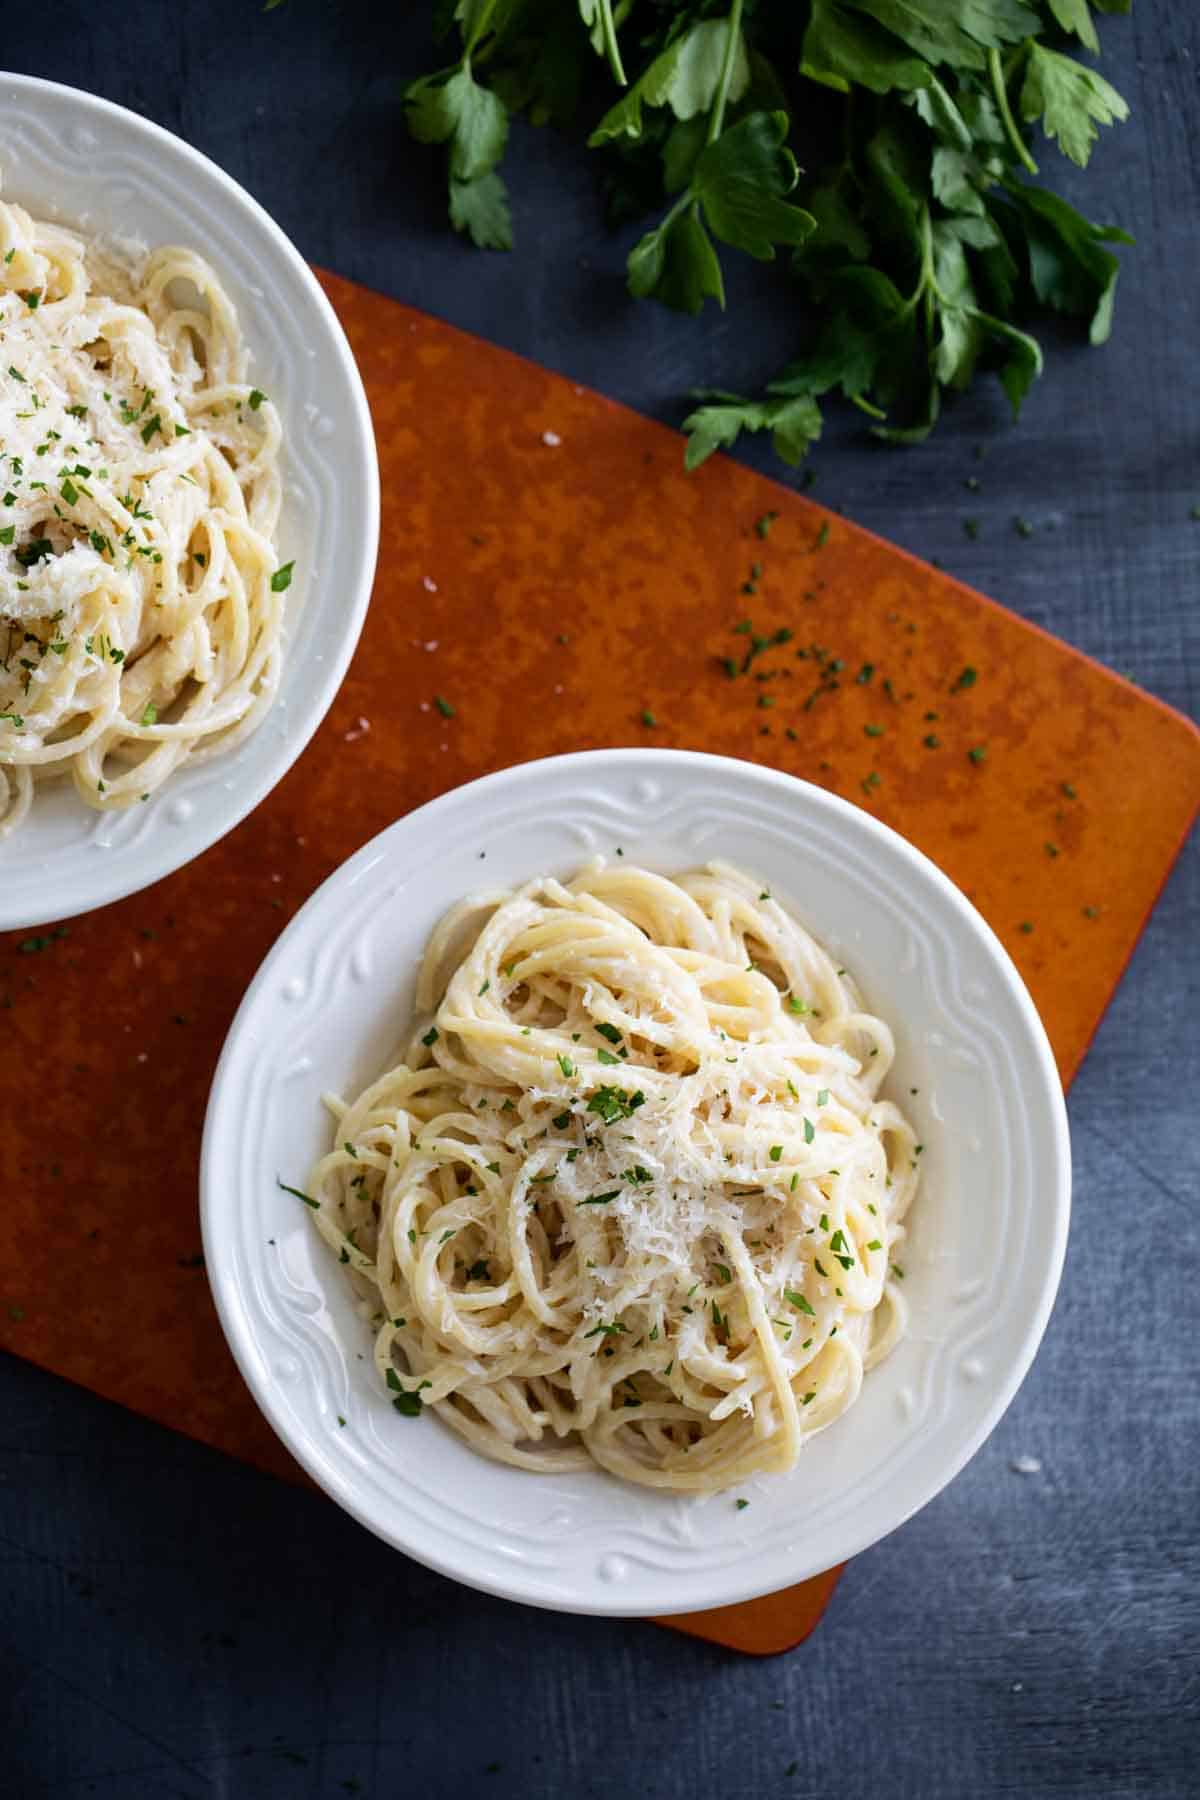 Bowls of parmesan pasta topped with parmesan cheese and herbs.